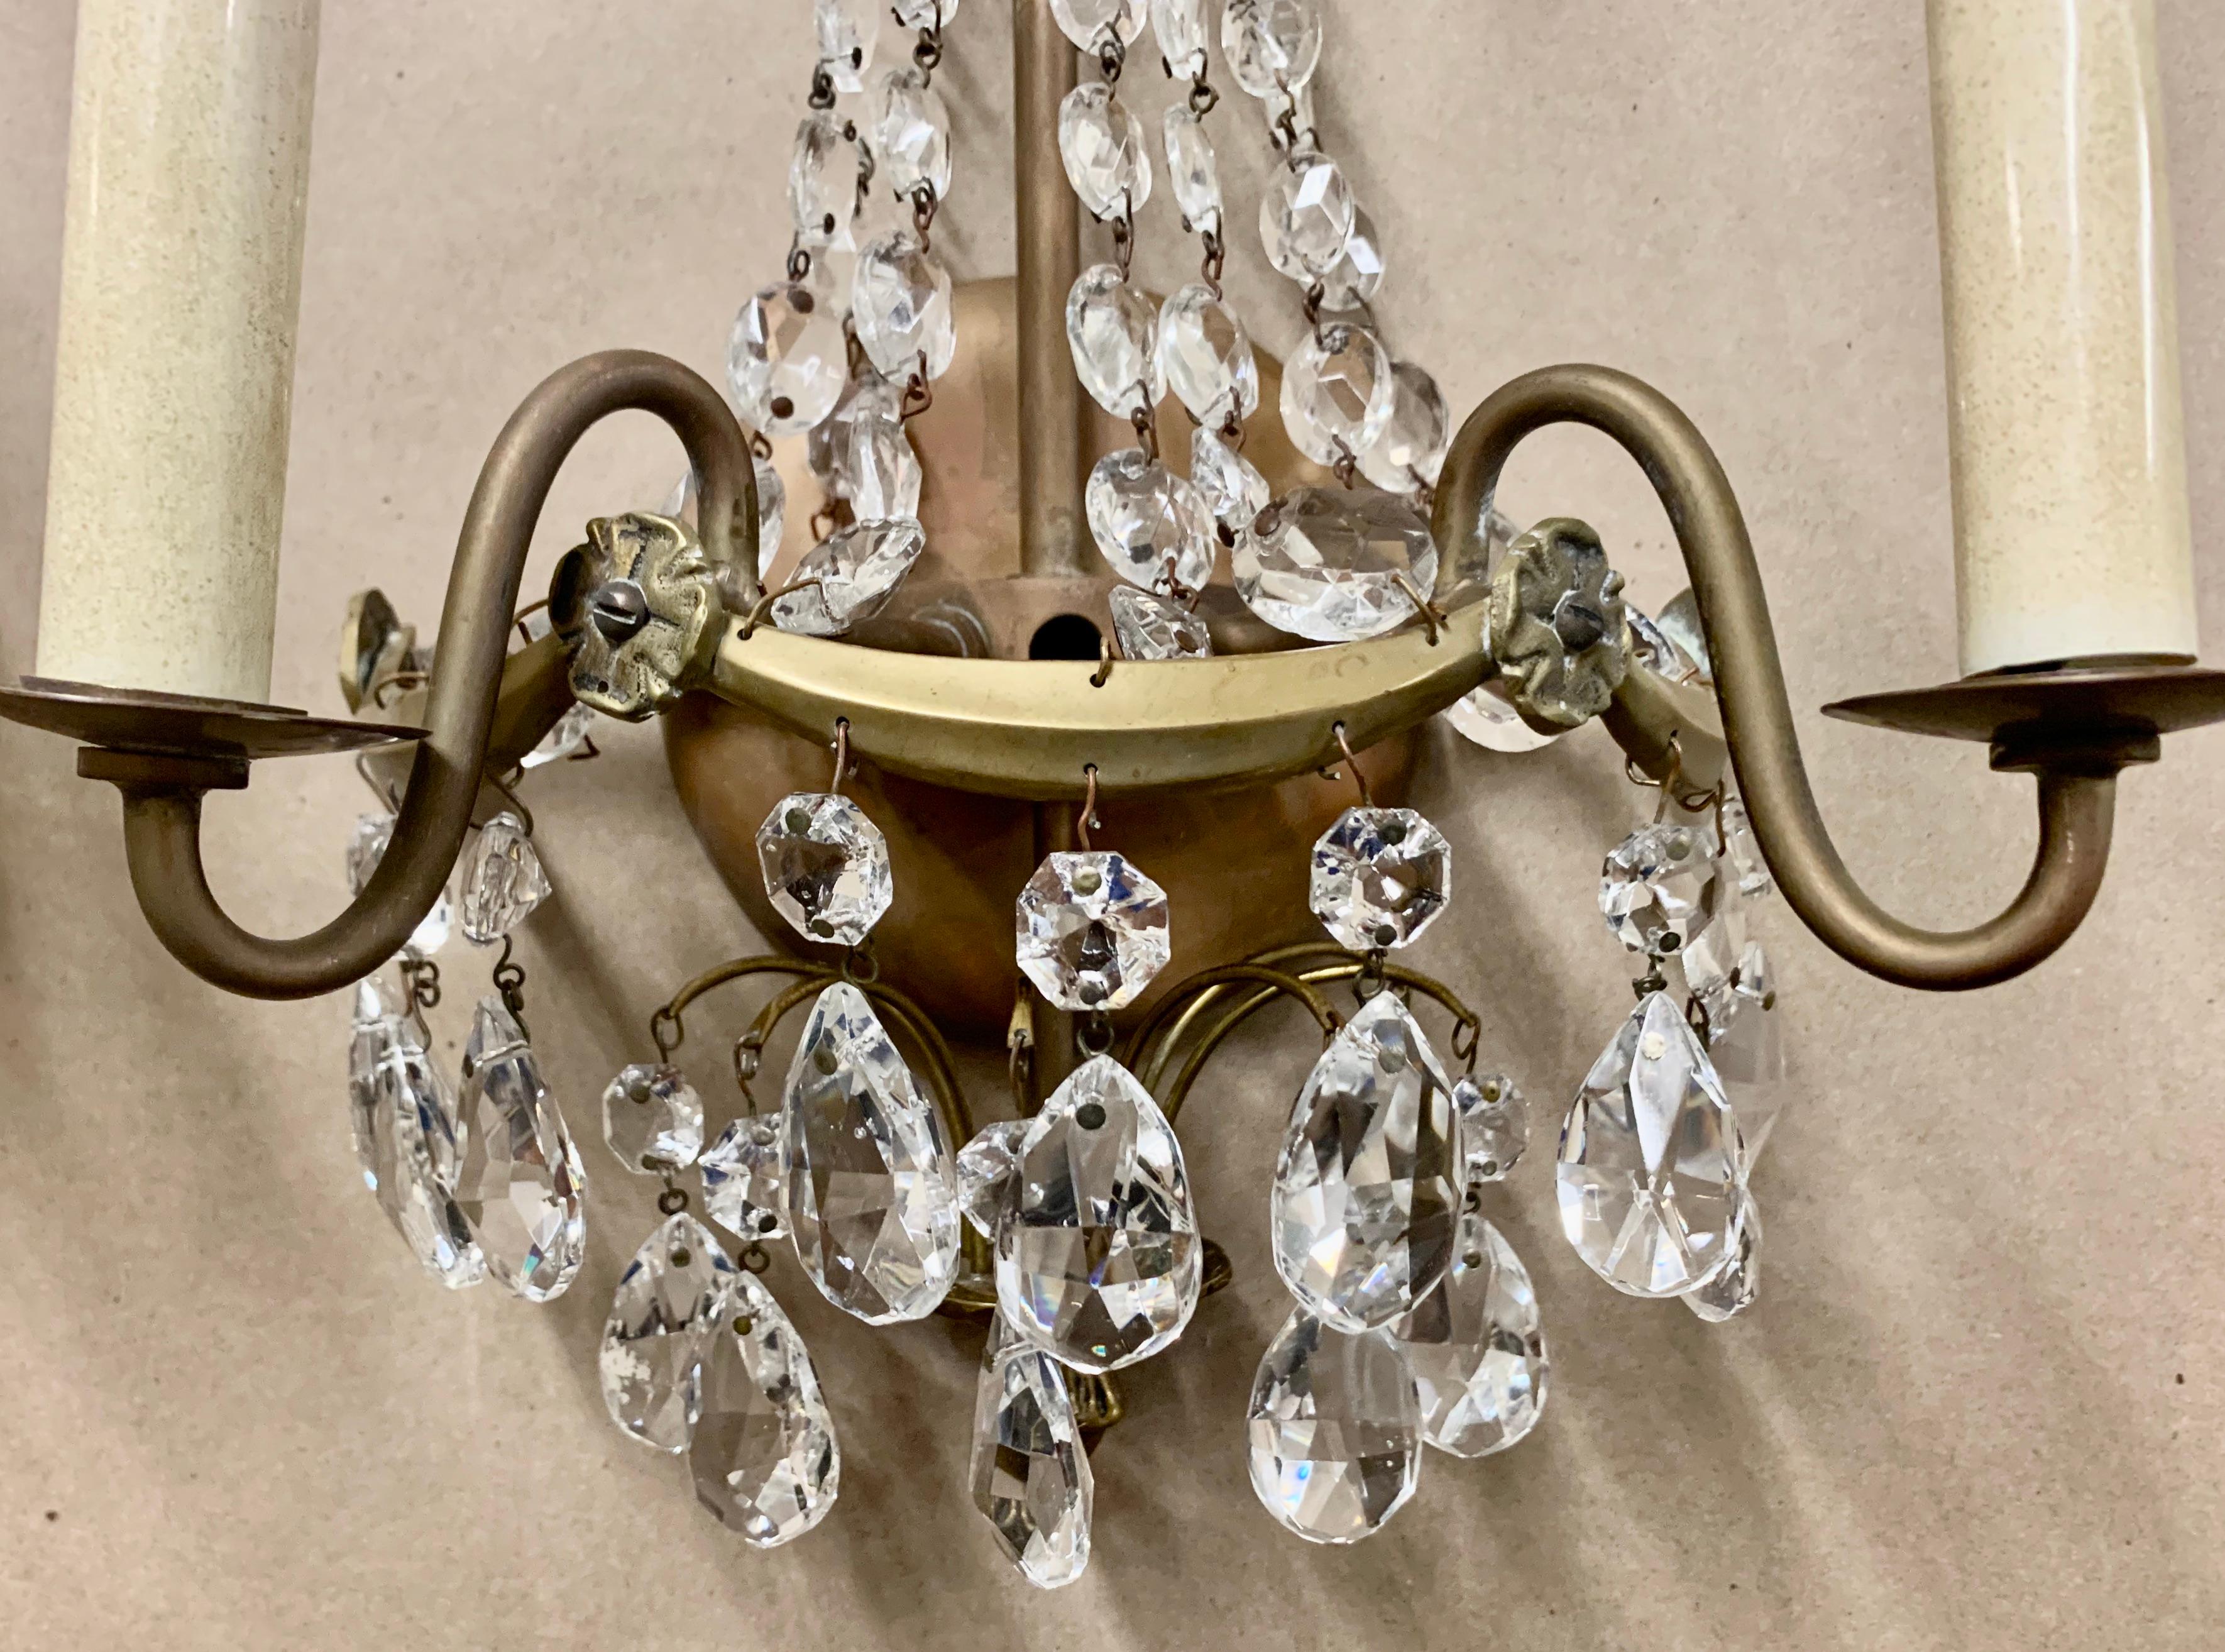 Pair of Swedish Gustavian (neo-classical) two light sconces. The frames are bronze hung generously with faceted crystal drops. There are six arms above and below with faceted crystal teardrops. There are also swags of faceted beads from the top to